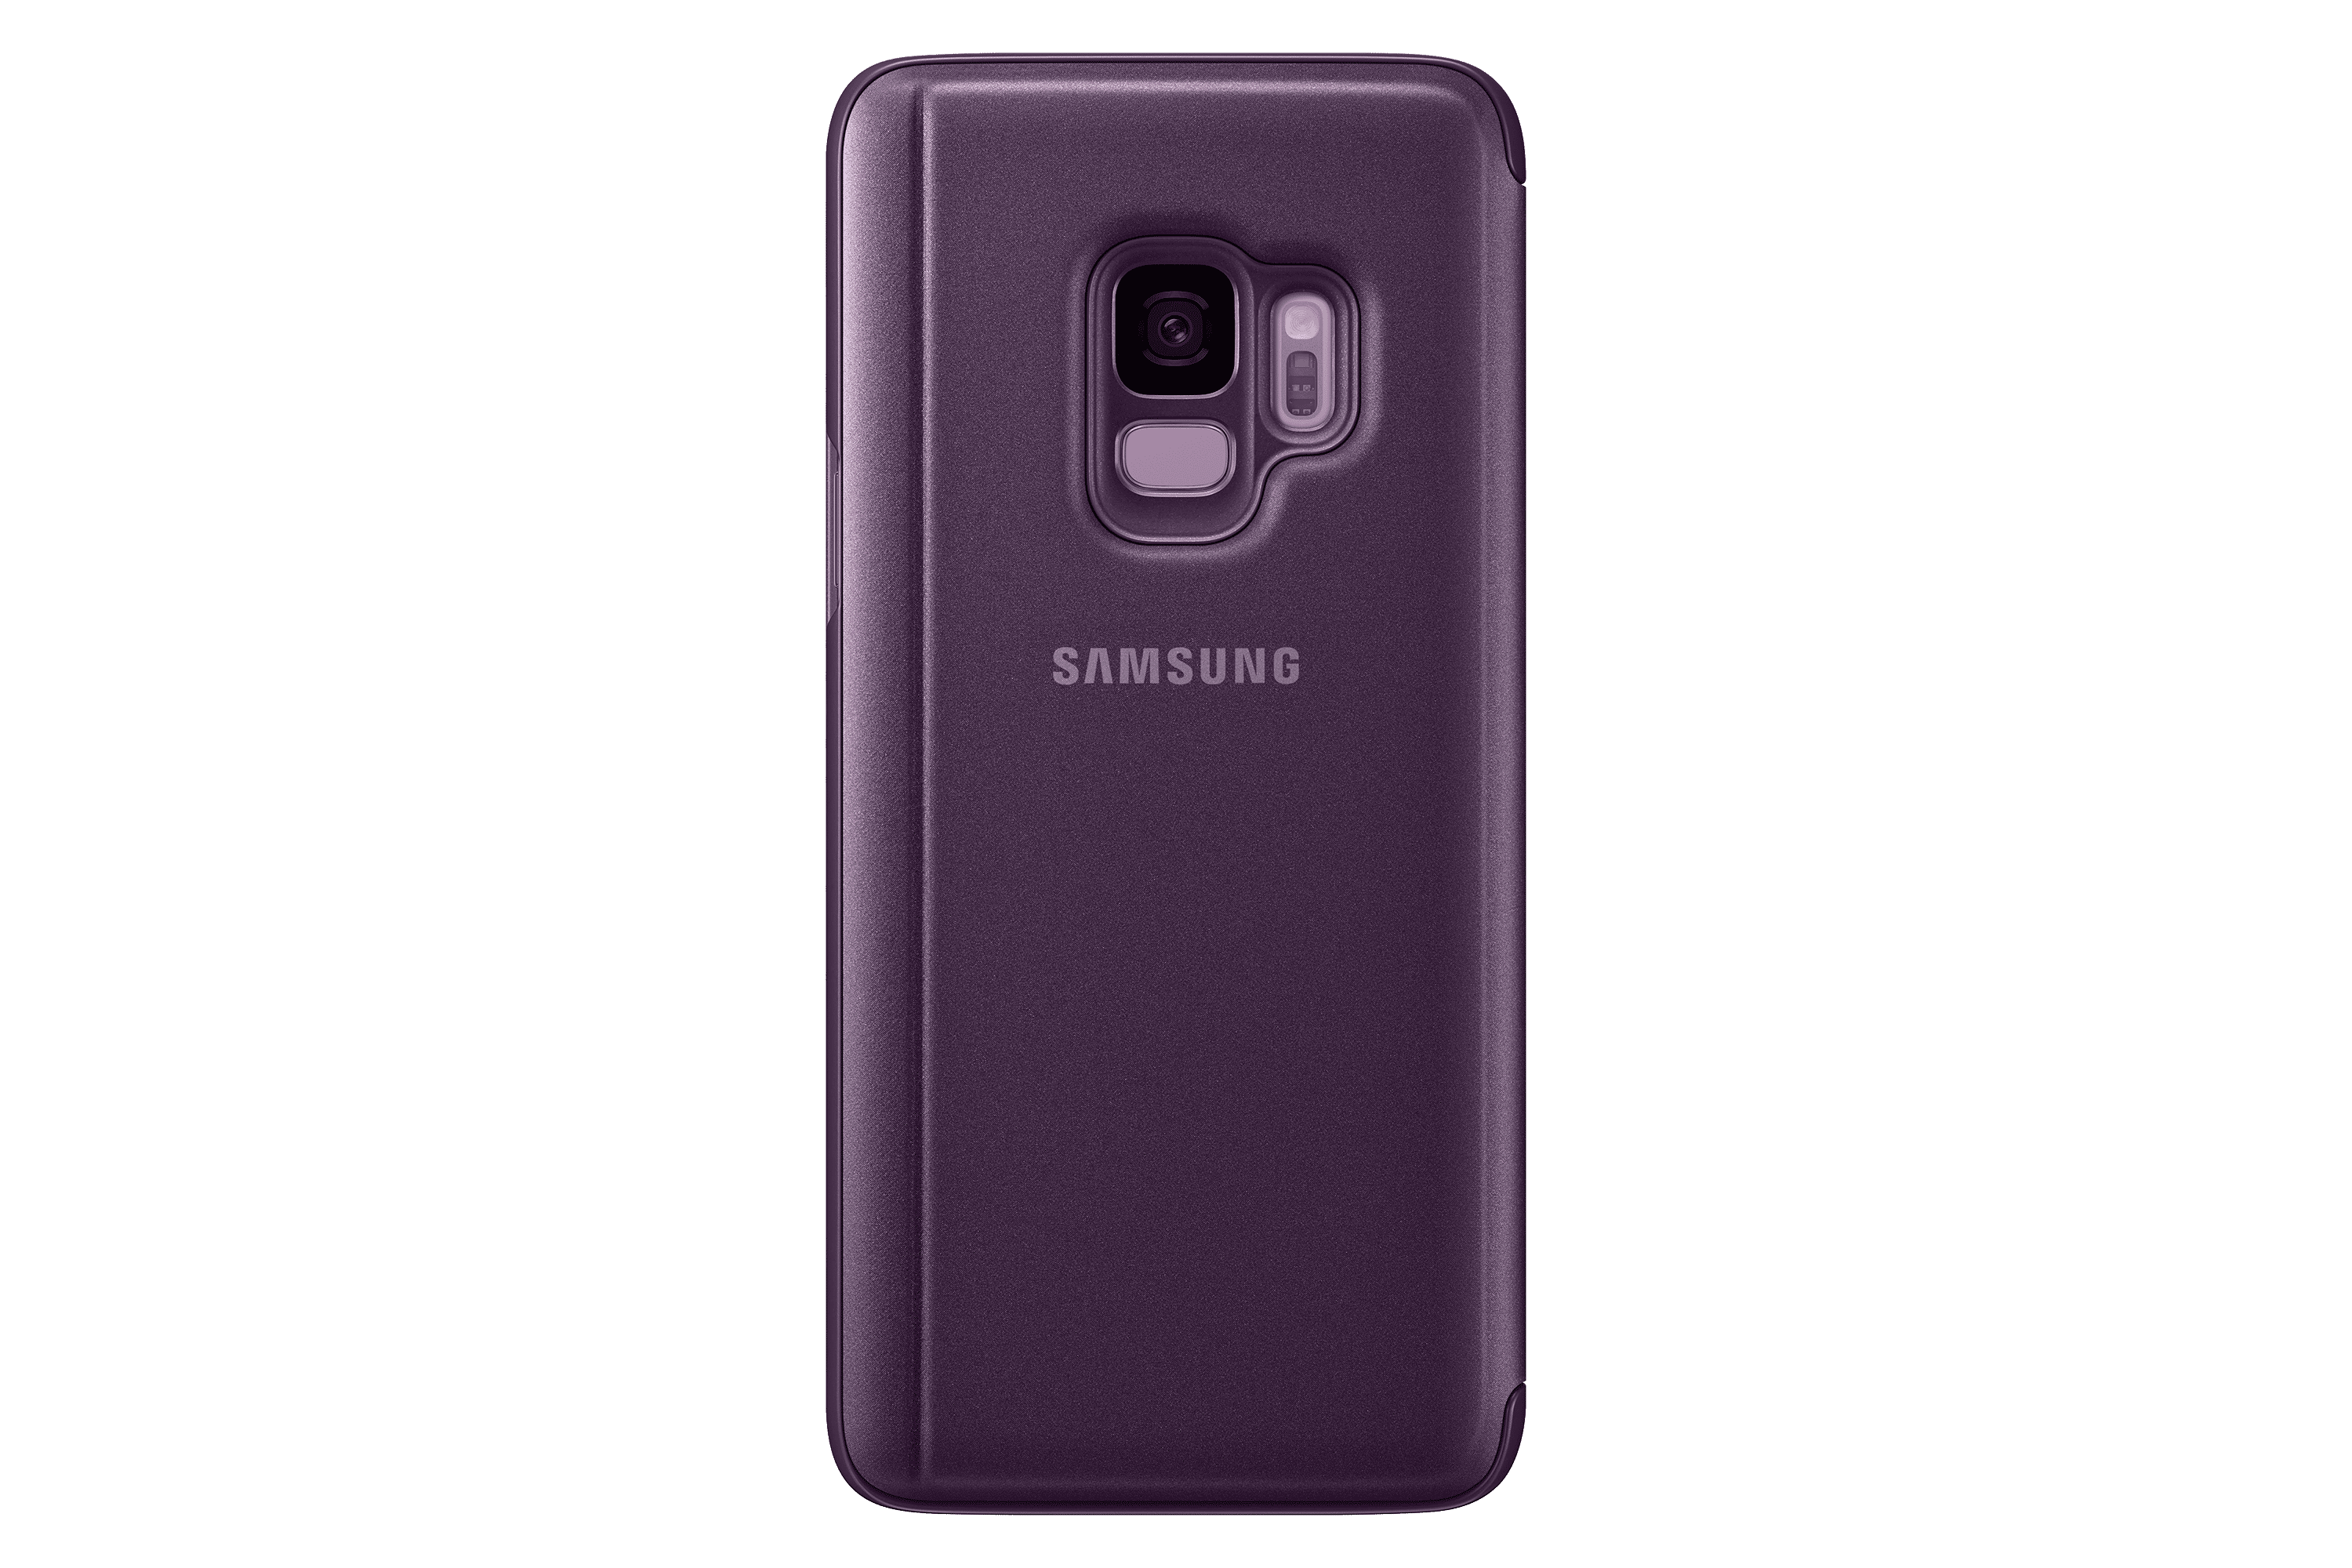 The layout To contaminate Intervene Samsung S-View Flip Cover Clear for Samsung Galaxy S9 - Violet - Walmart.com